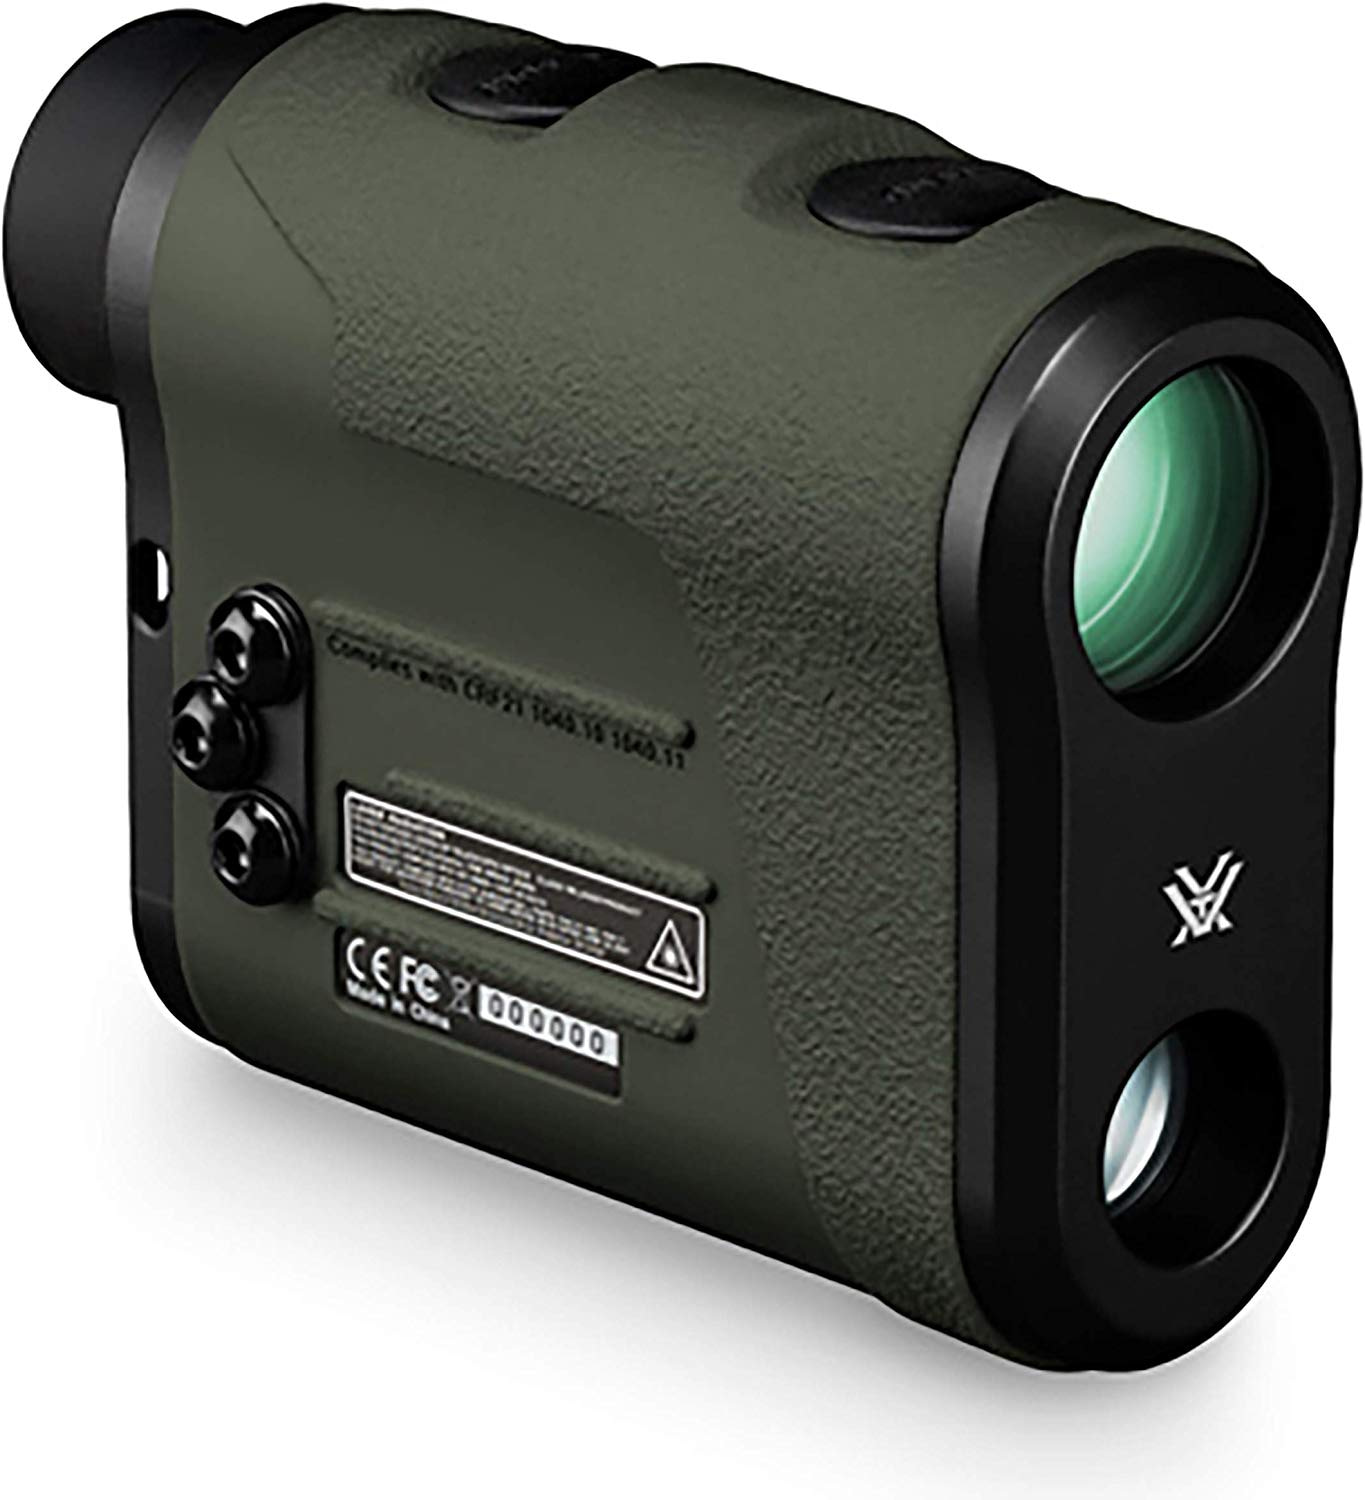 Best Rangefinder for Bow and Rifle Hunting